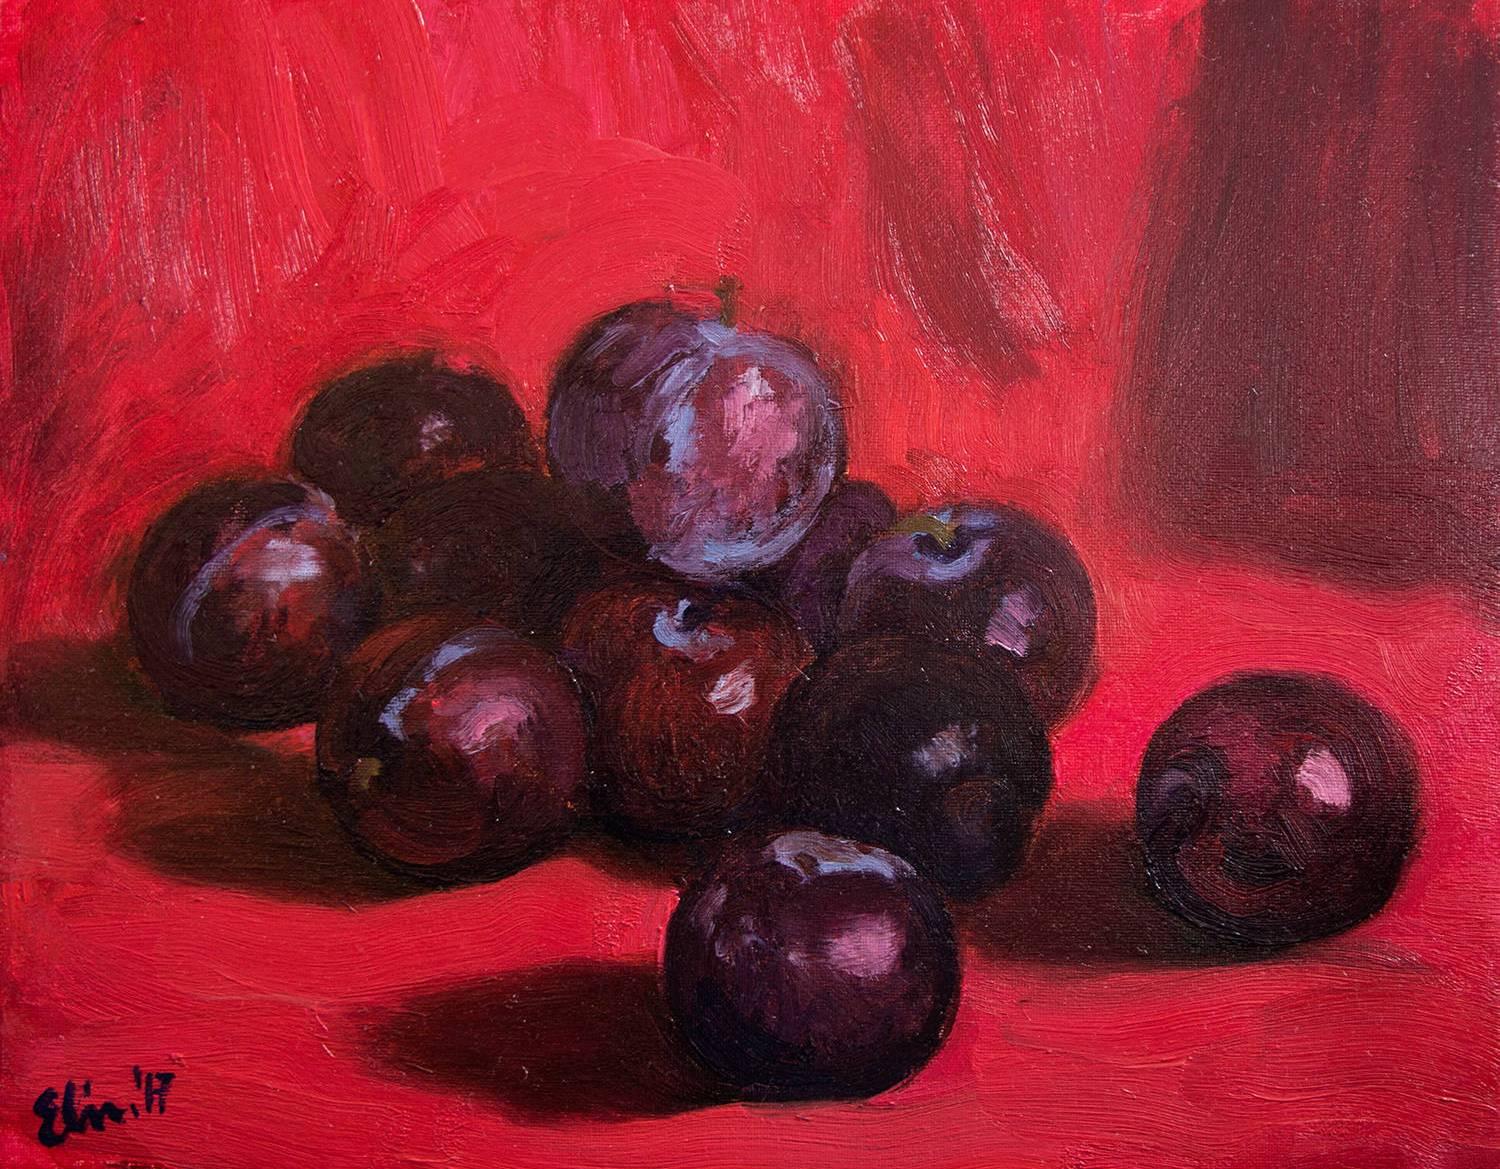 Title: Still Life with Supine Nere

Artist: Elina Arbidane (contemporary impressionist painter), Latvia 
Small original hand-painted alla prima oil on canvas still life with Susine Nere (Italian variety of plums) on red background
Painted in